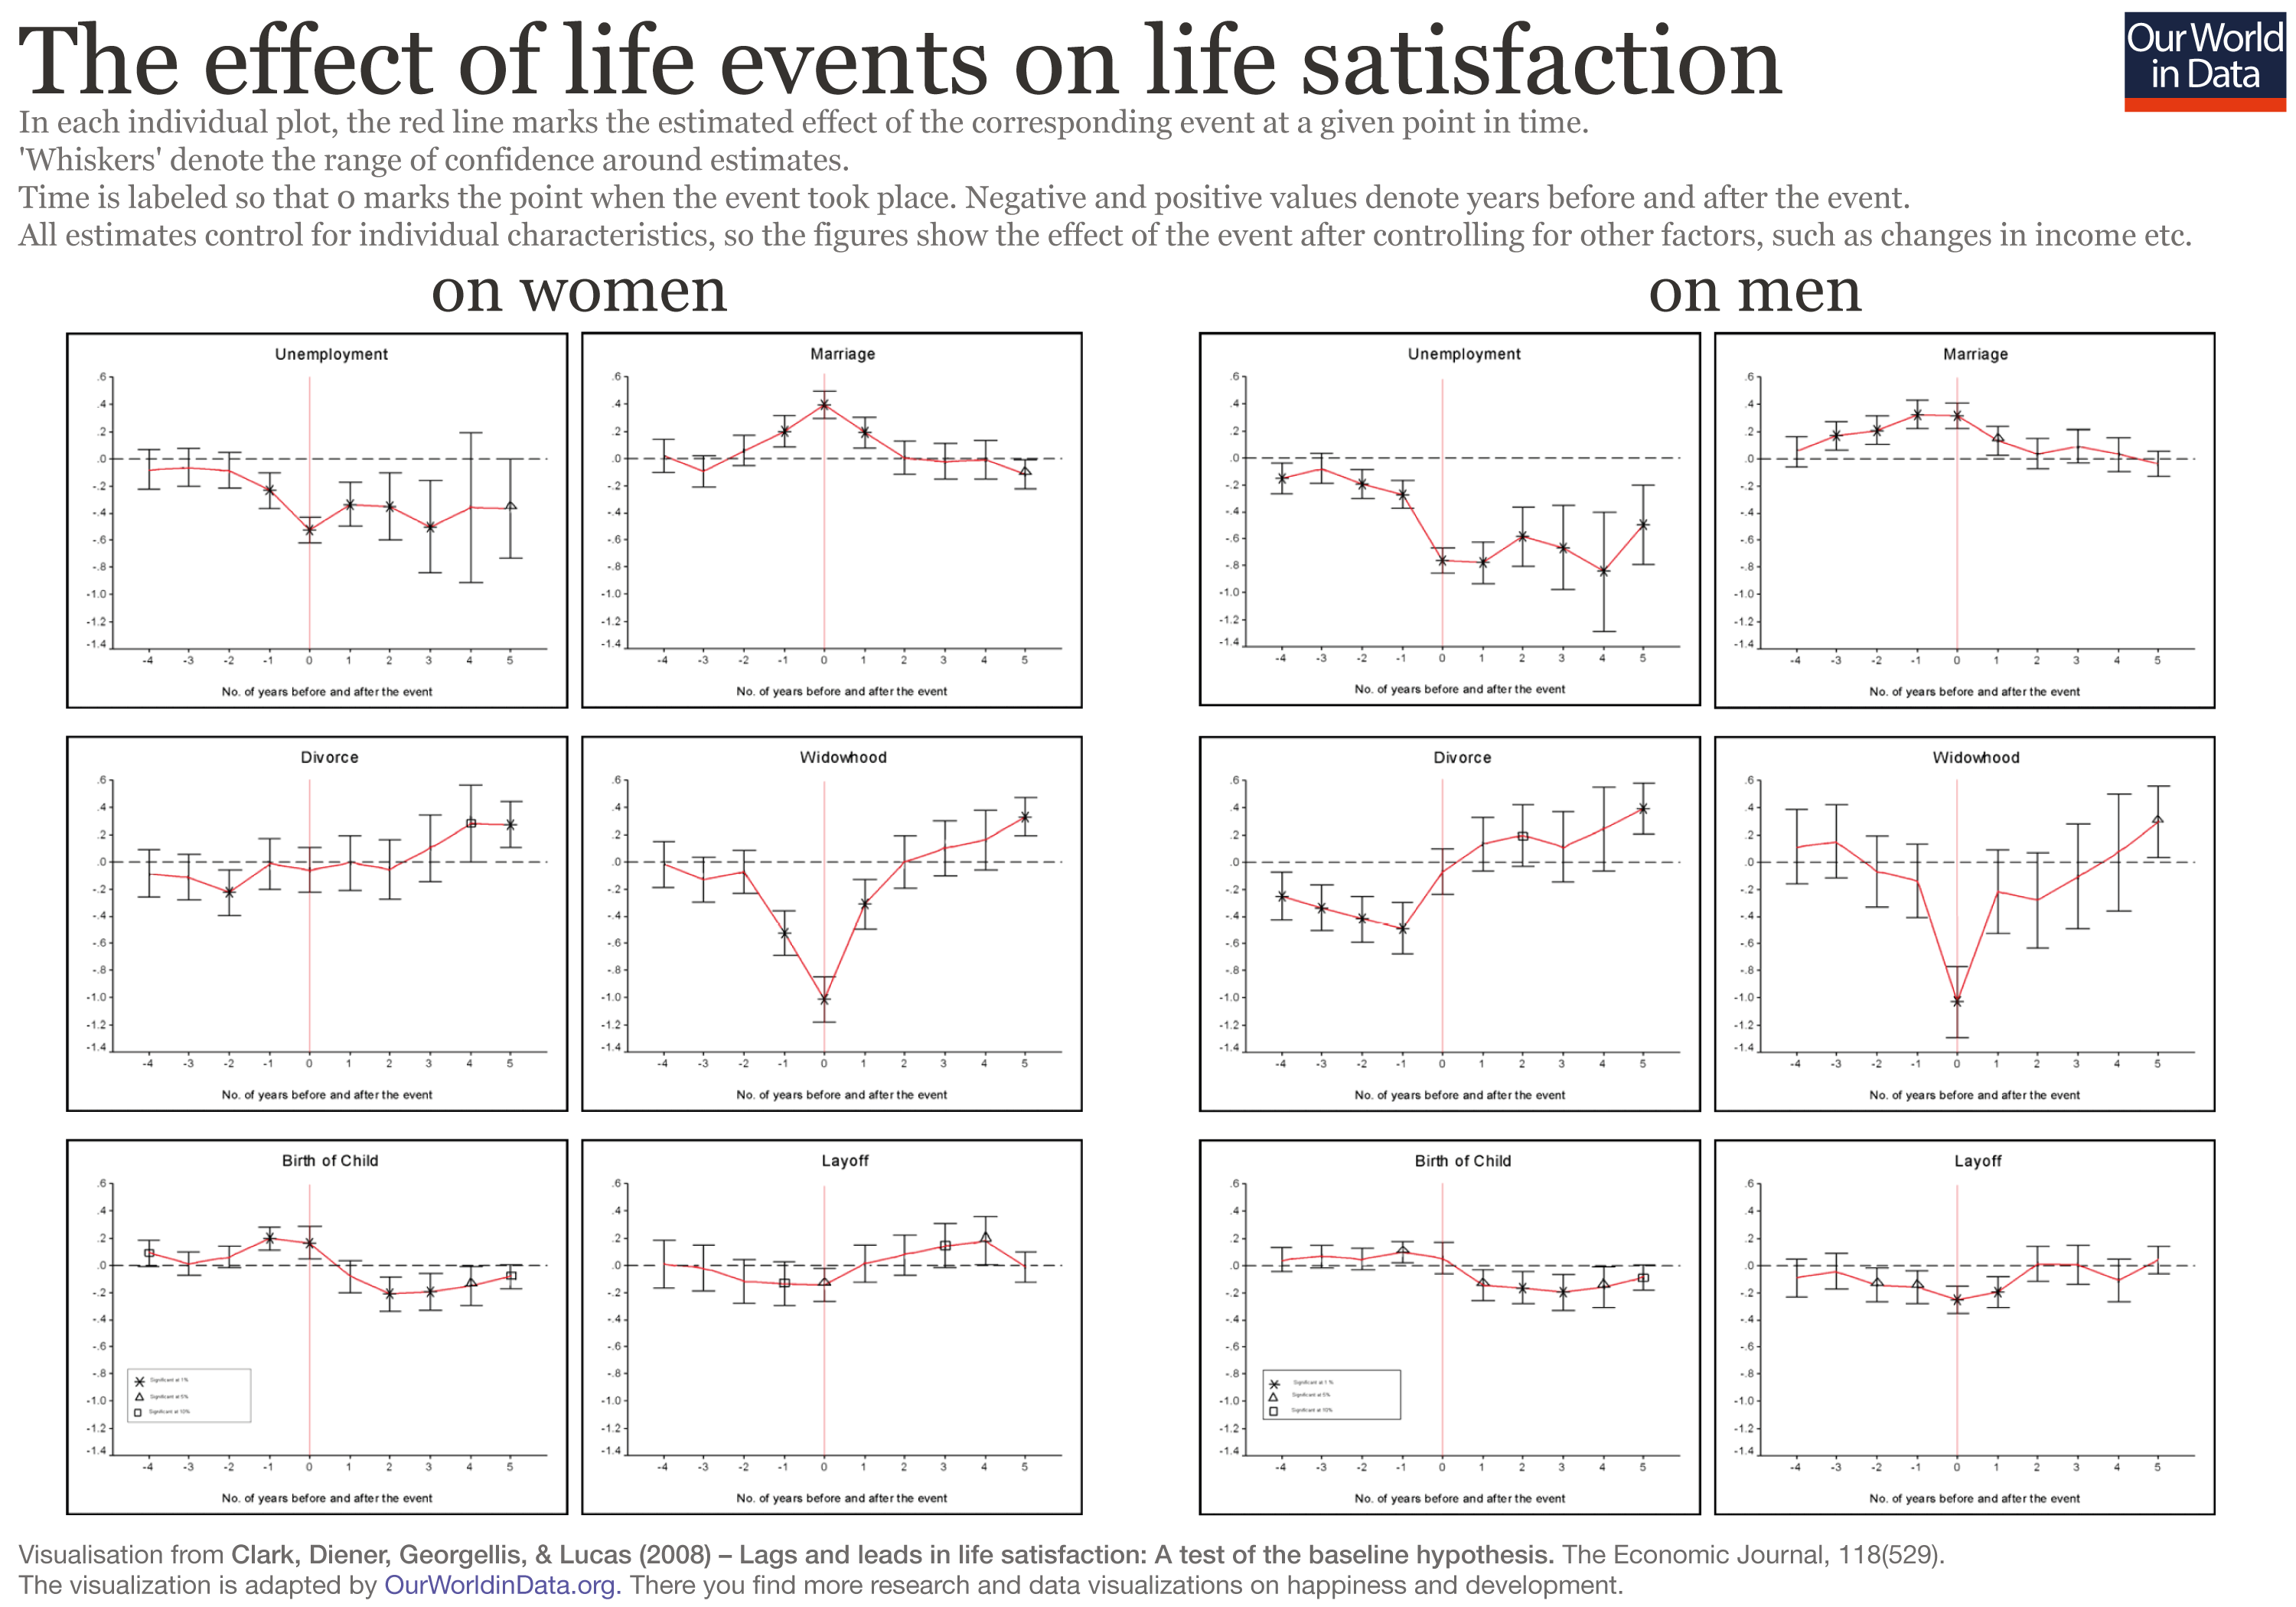 The effect of life events on life satisfaction